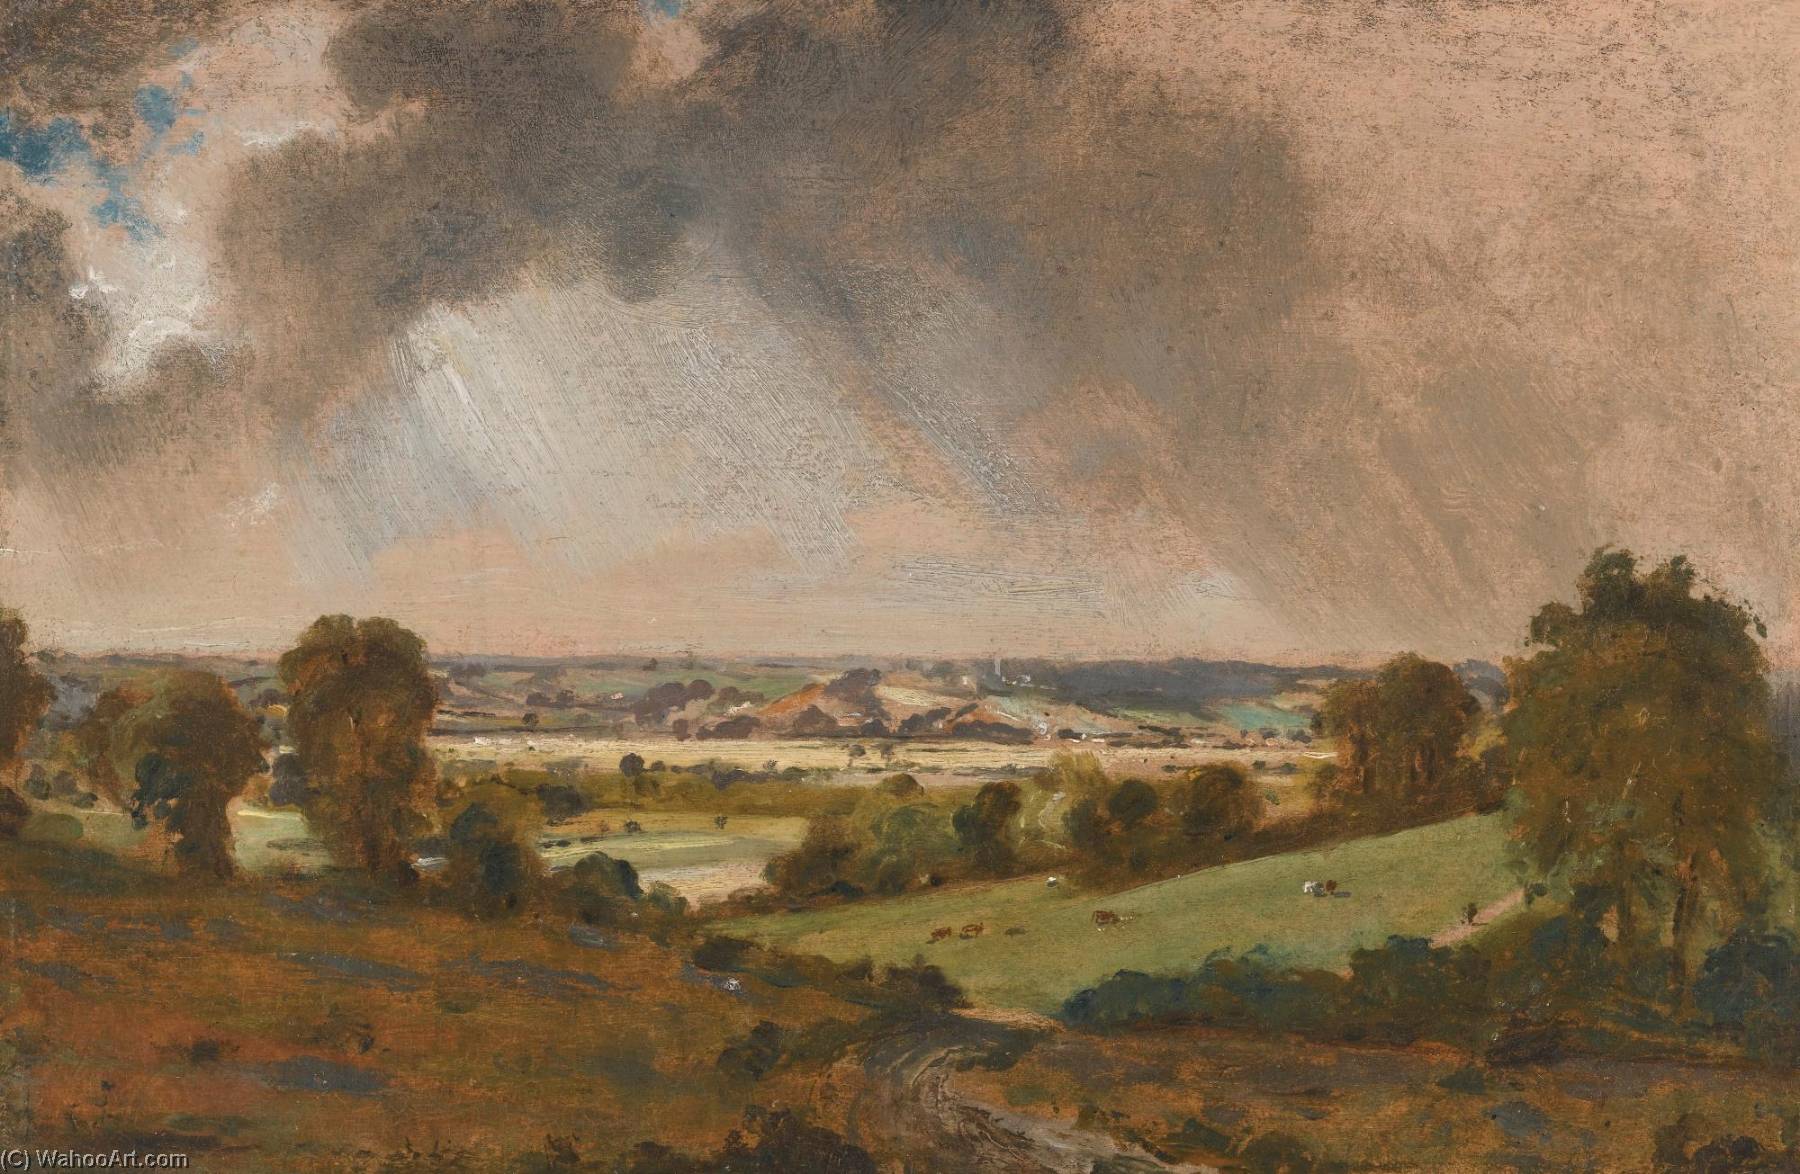 WikiOO.org - Enciklopedija dailės - Tapyba, meno kuriniai John Constable - Dedham Vale, with a view to Langham church from the fields just east of Vale Farm, East Bergholt